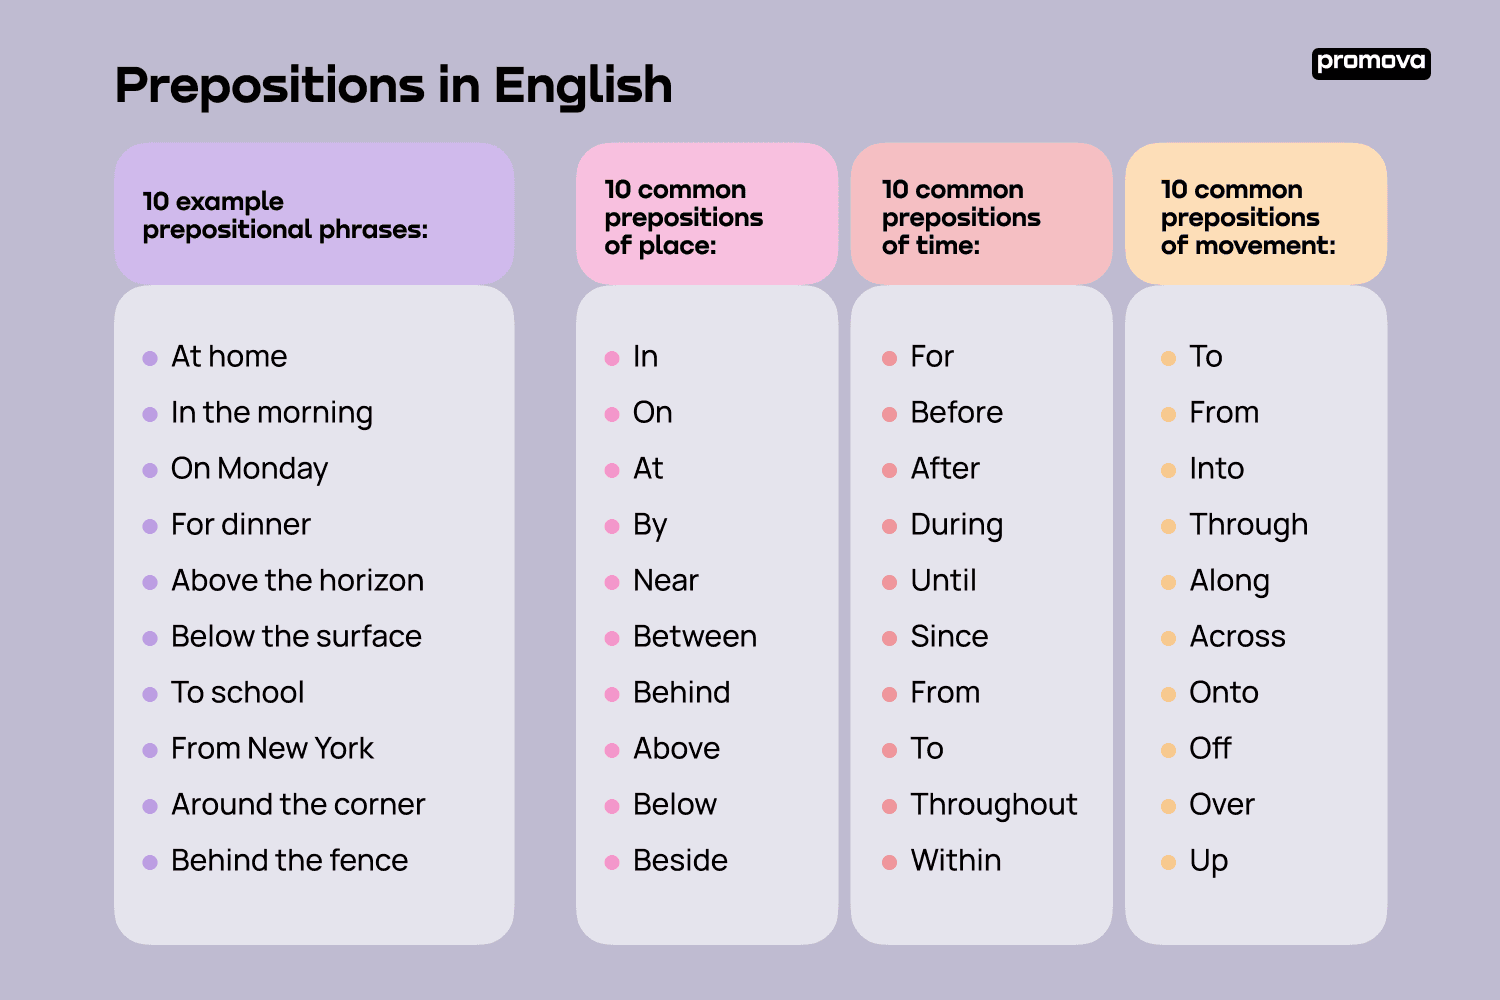 Prepositions in English